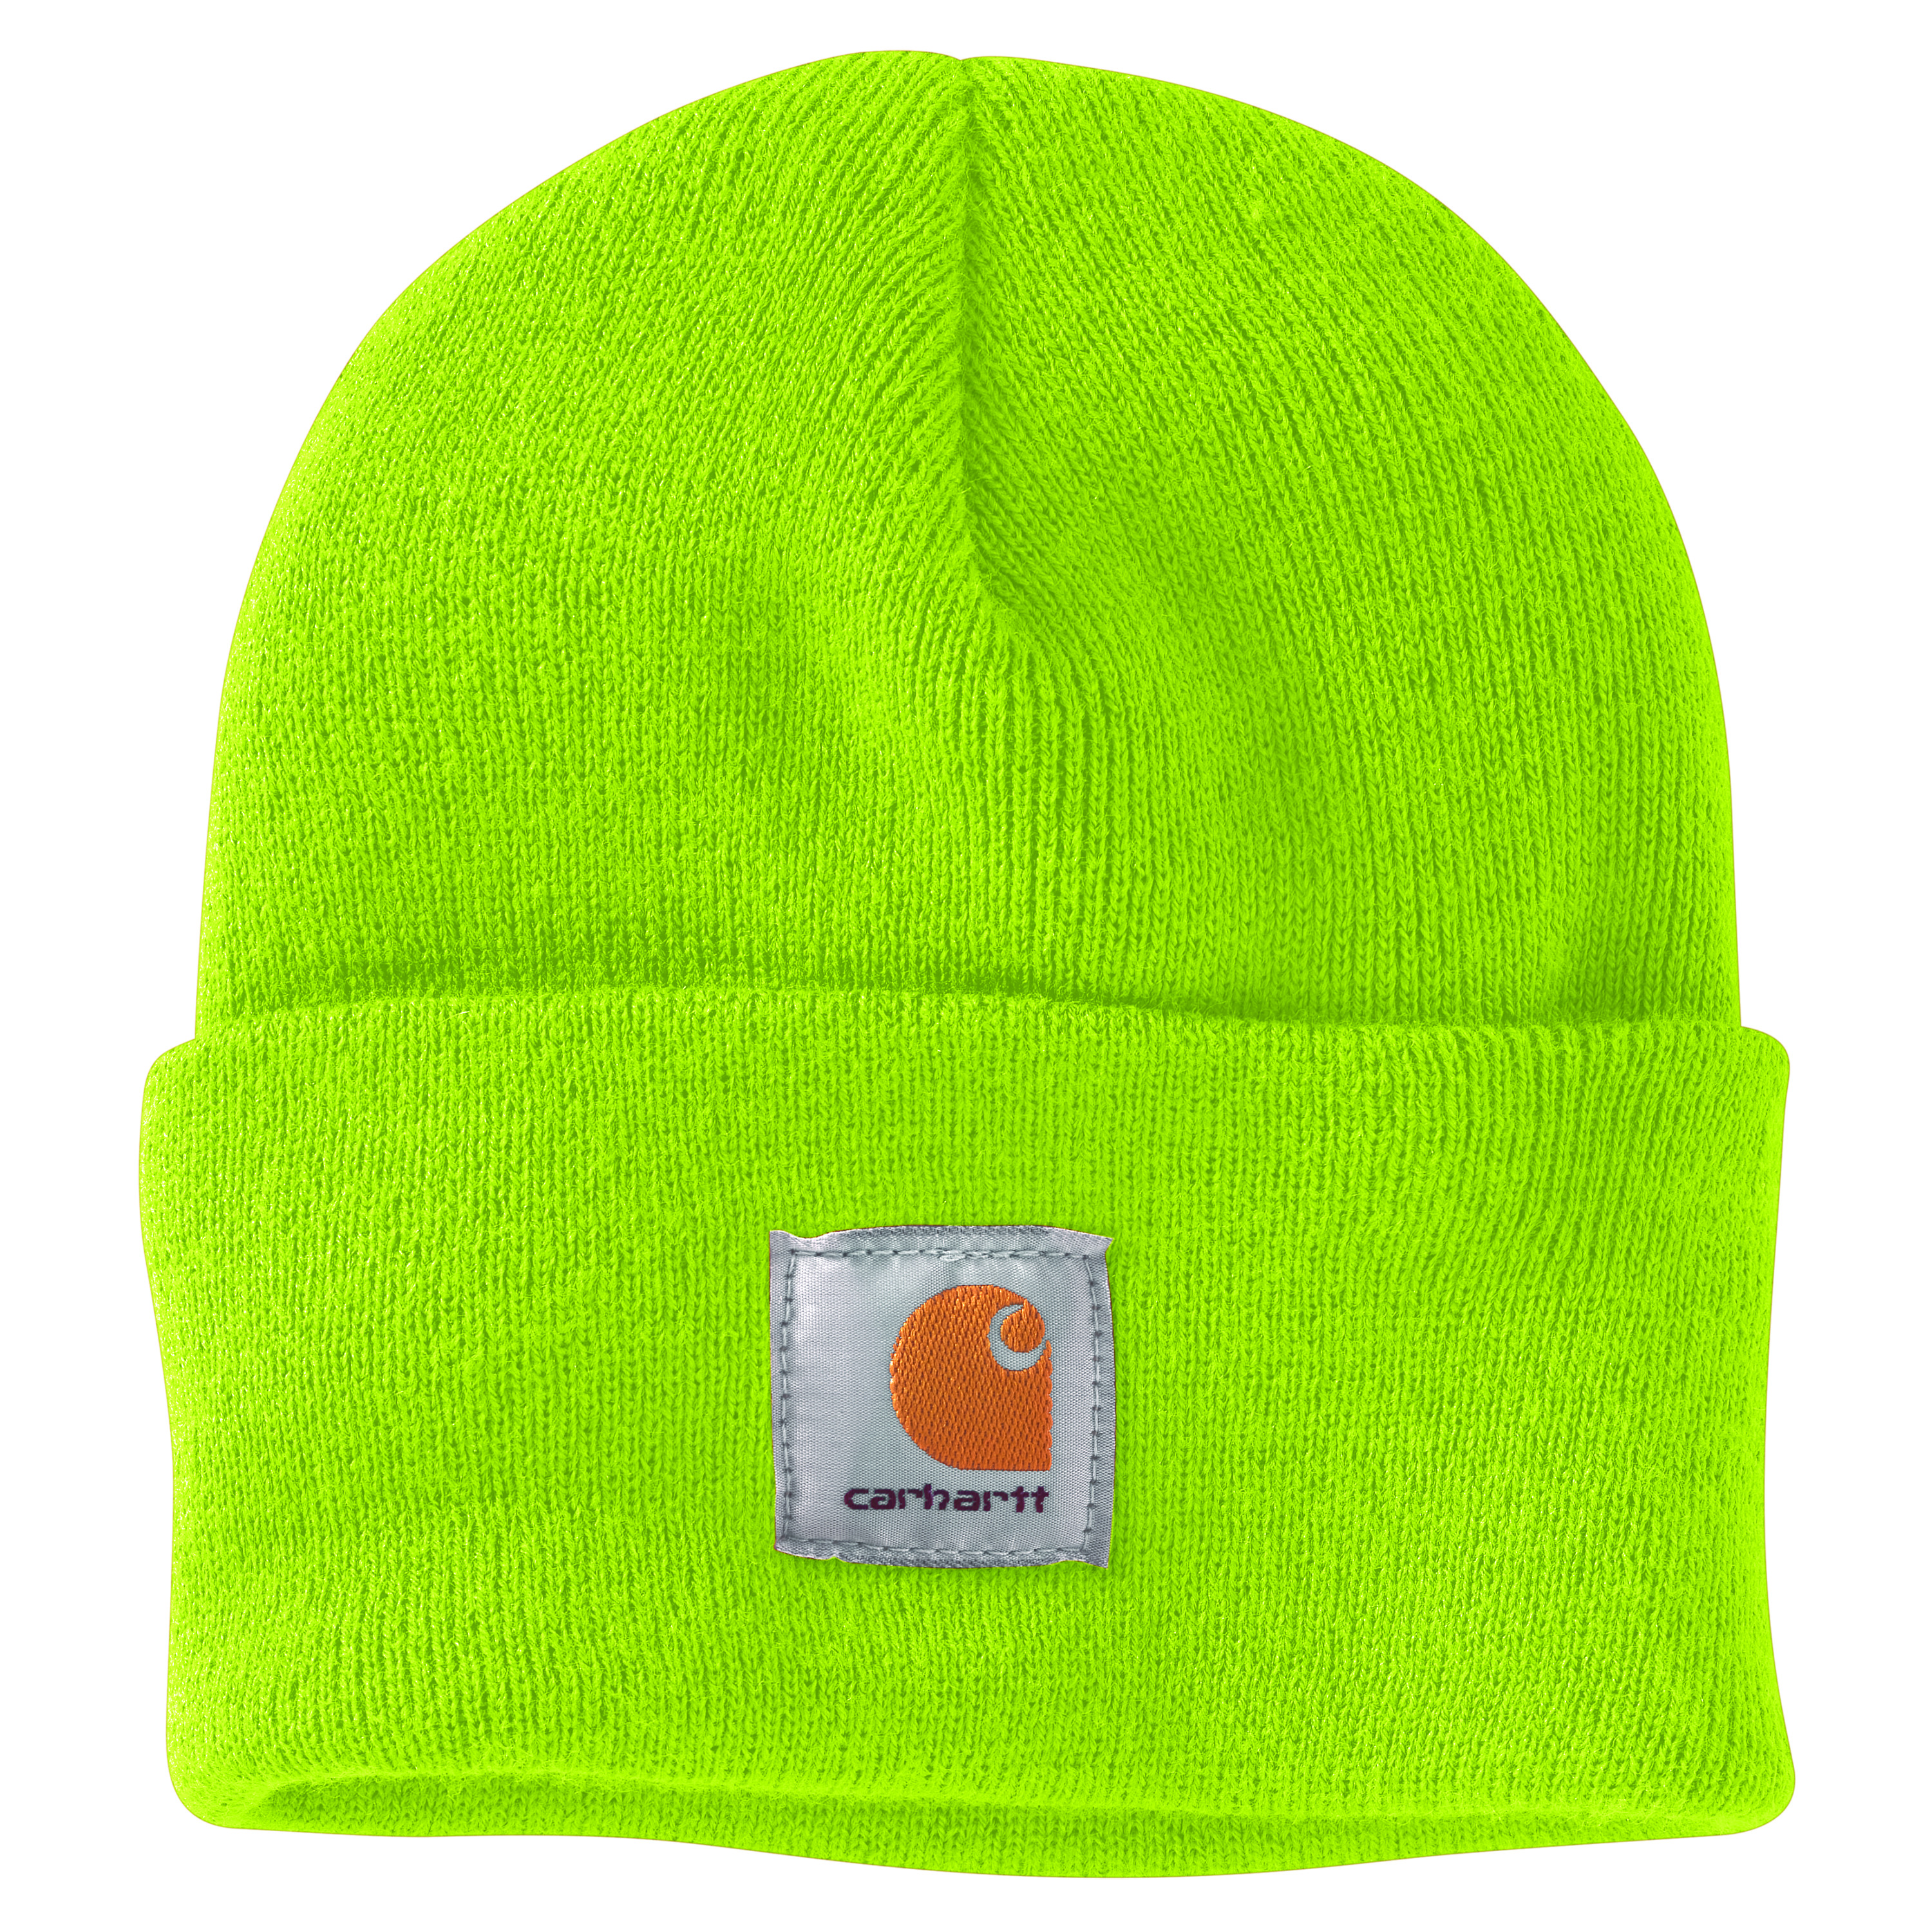 Carhartt Knit Watch Hat - Bright Lime